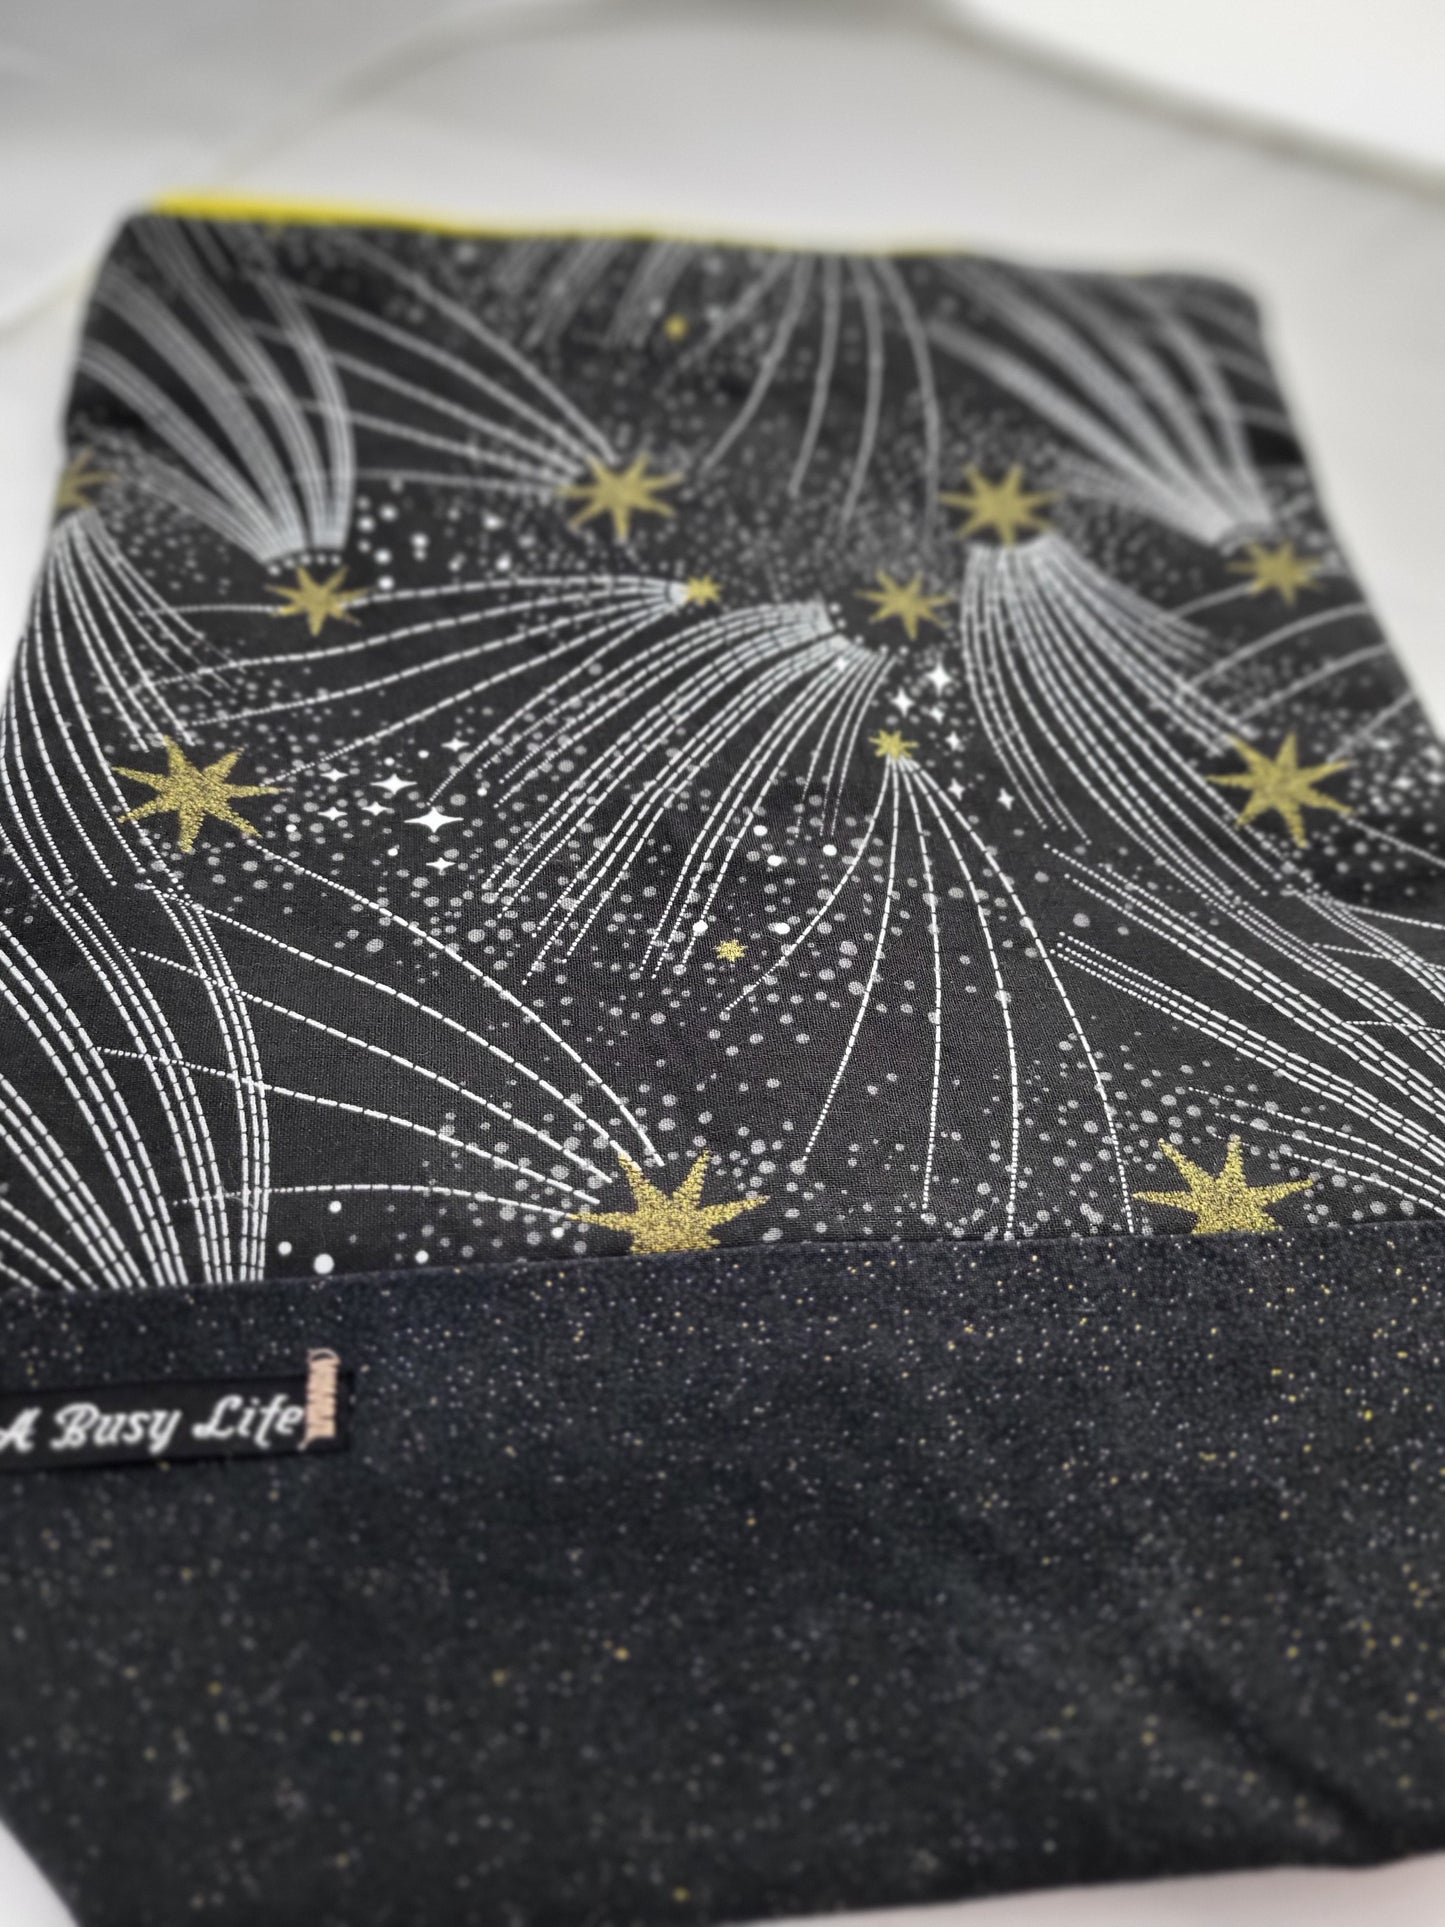 Black and Gold Celestial project bag, Zippered Project Bag,  project bag,  Storage bag